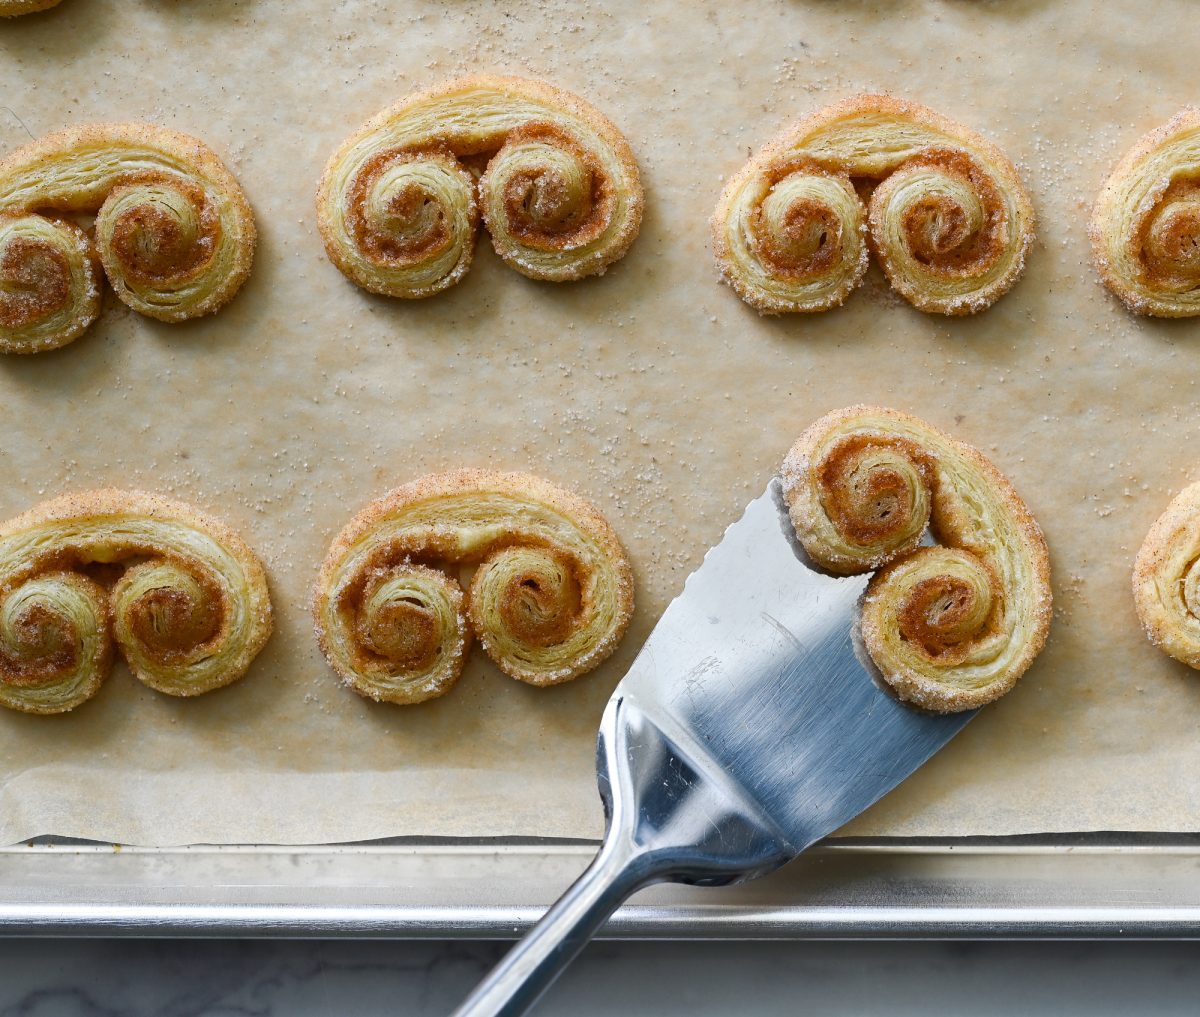 flipping the palmiers partly through cooking